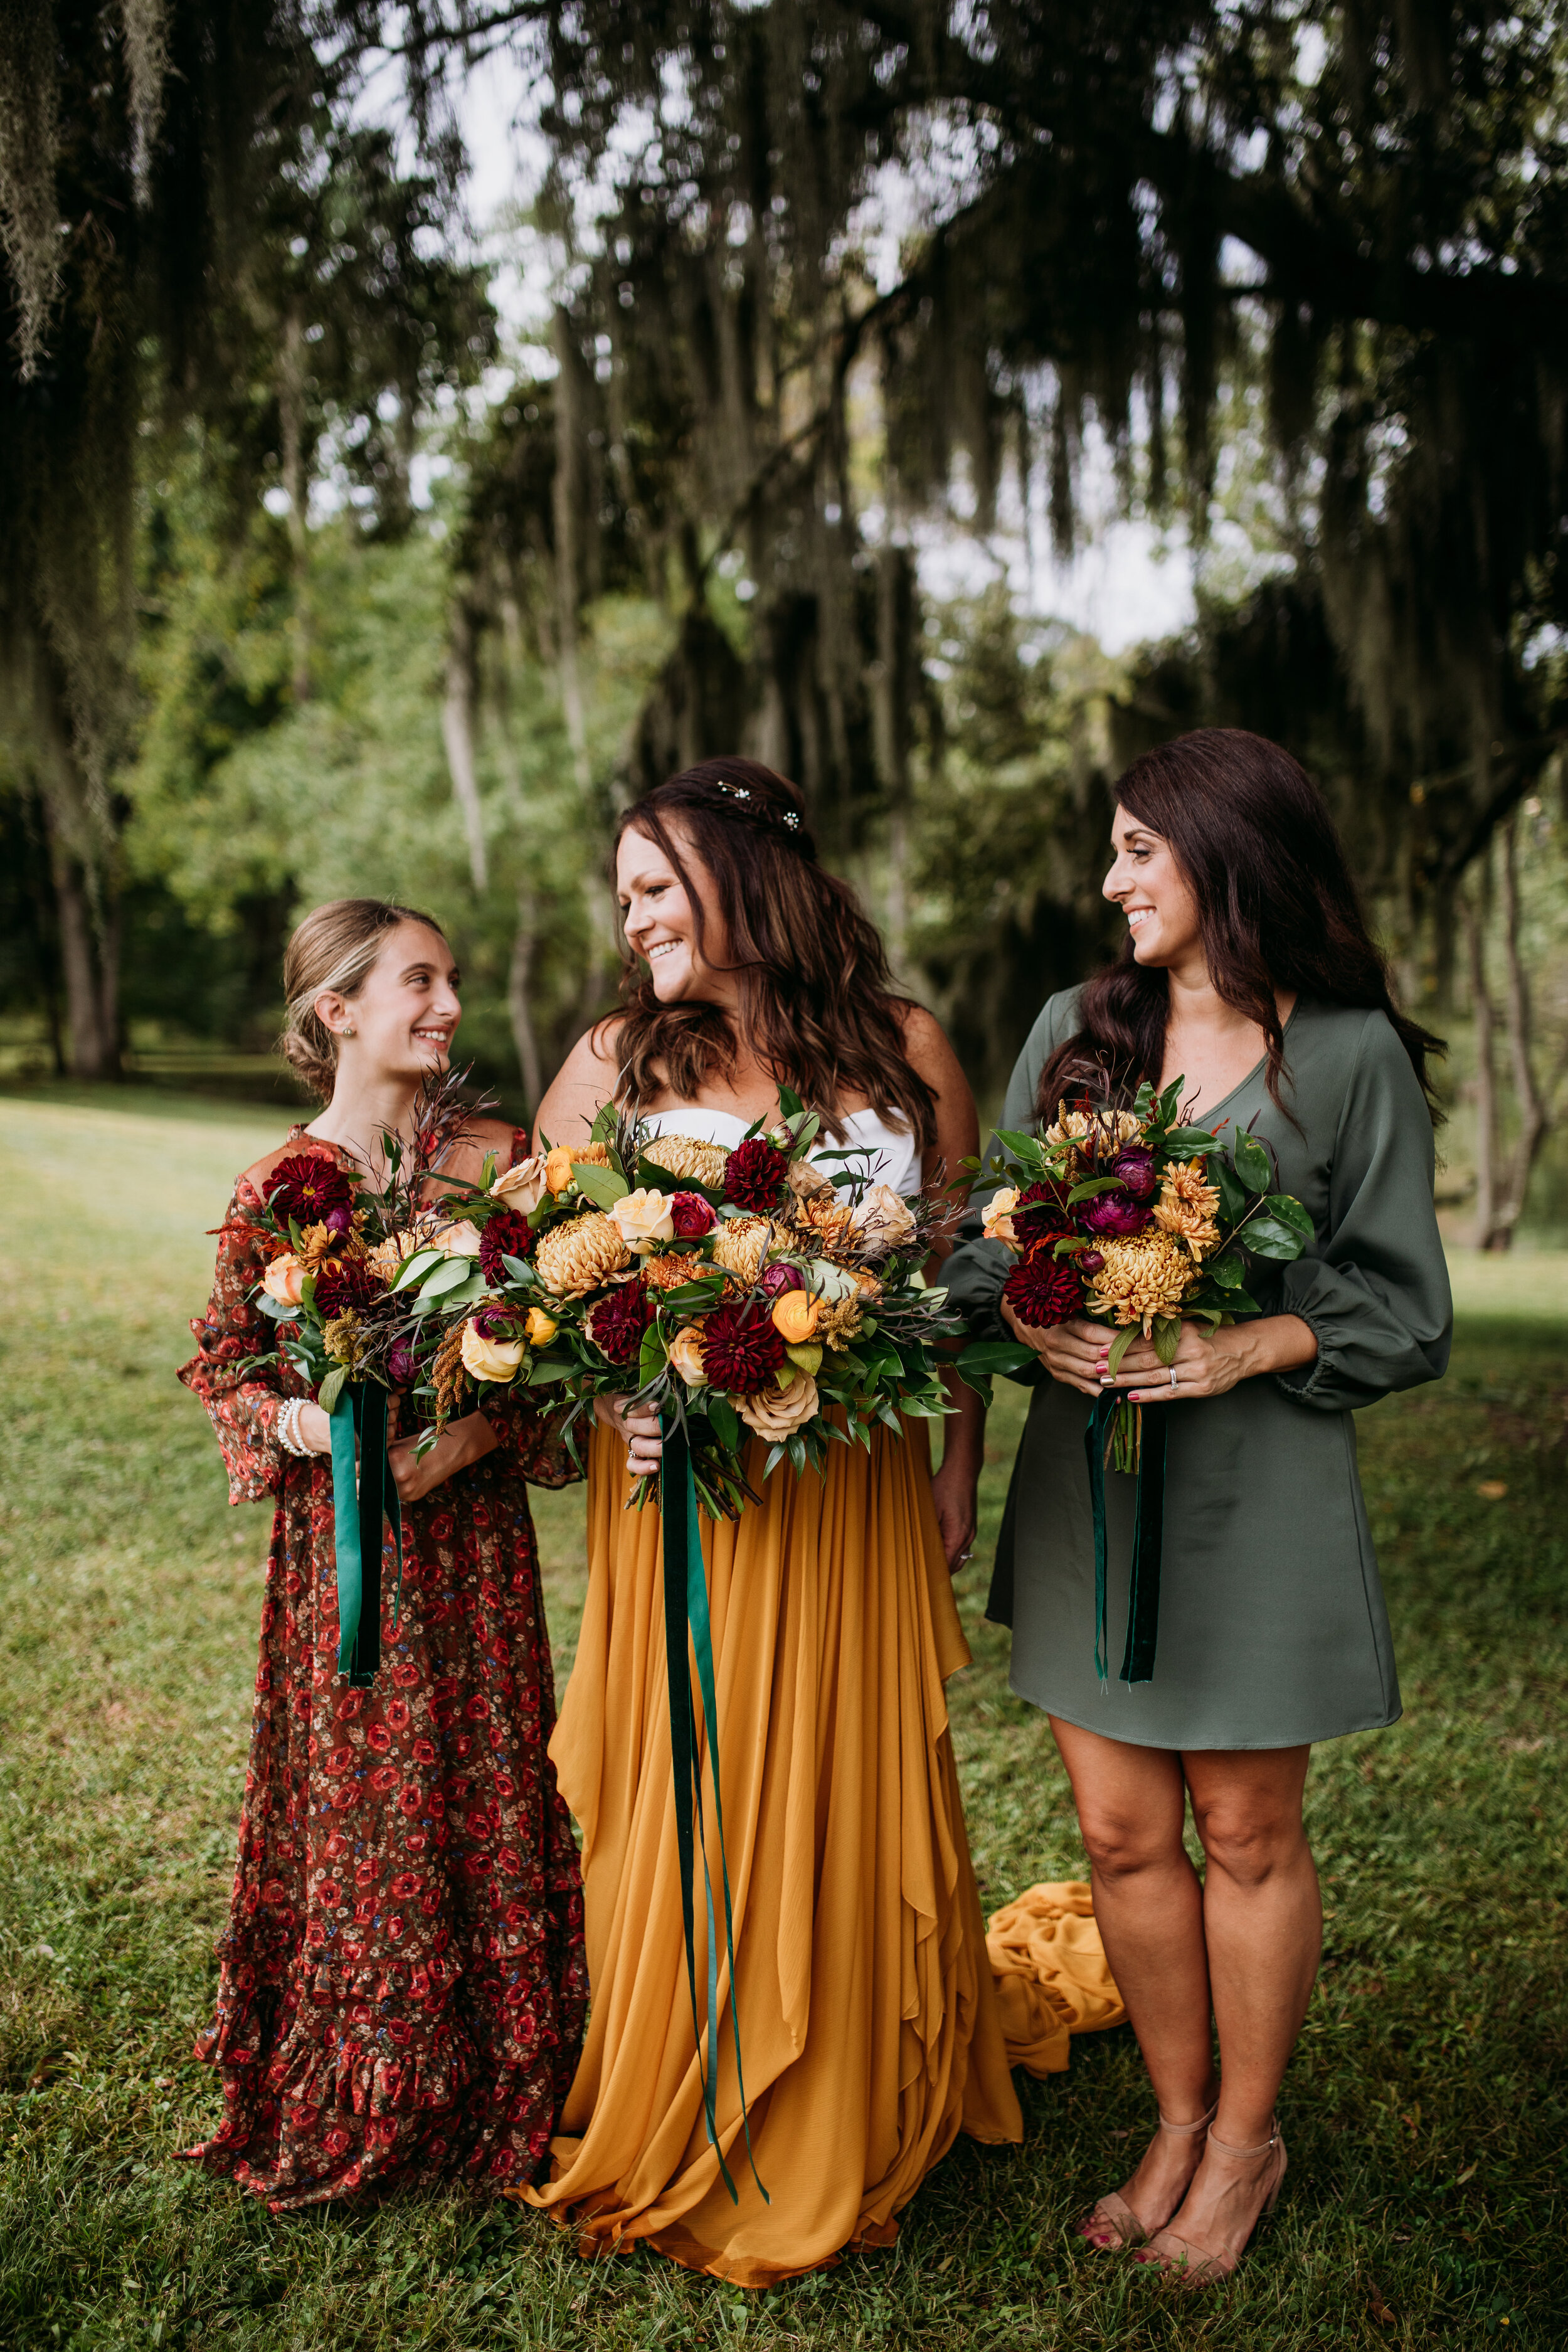 ivory-and-beau-florals-alex-and-david-red-gate-farms-wedding-flowers-wedding-florals-savannah-wedding-savannah-florist-wedding-florist-colorful-rich-bold-inspiration-flowers-Bowles311.jpg